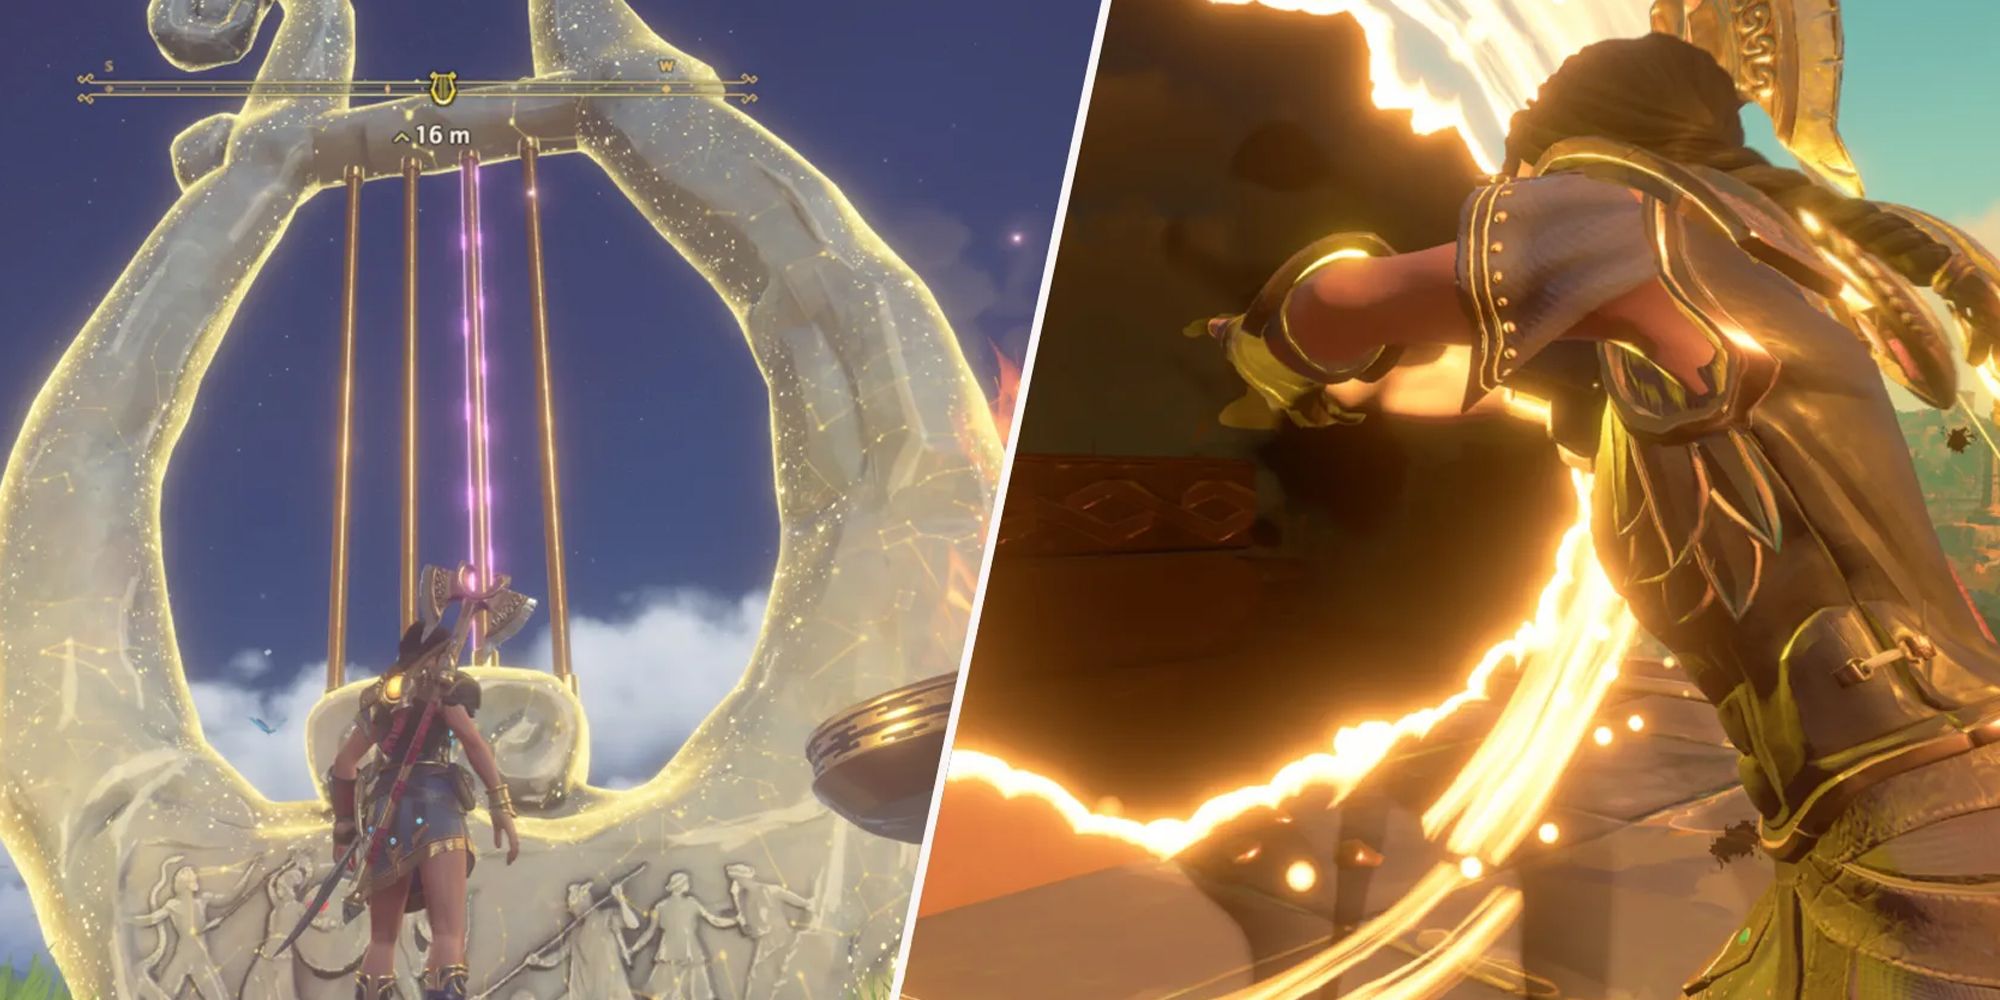 A split image of Fenyx beside a lyre and Fenyx reaching into a portal to get a reward in Immortals Fenyx Rising.